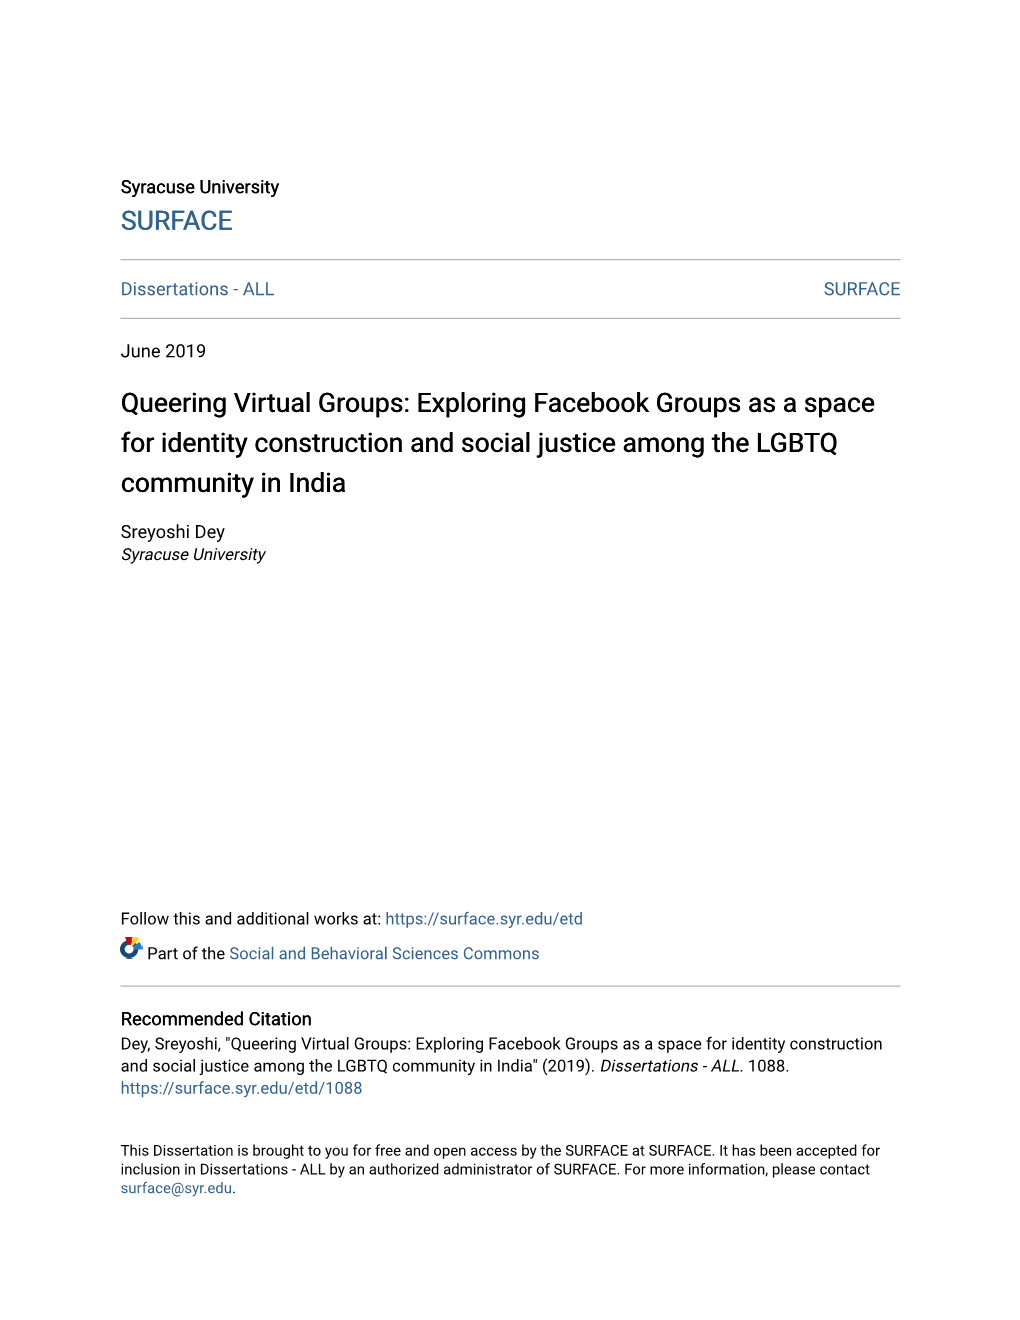 Exploring Facebook Groups As a Space for Identity Construction and Social Justice Among the LGBTQ Community in India